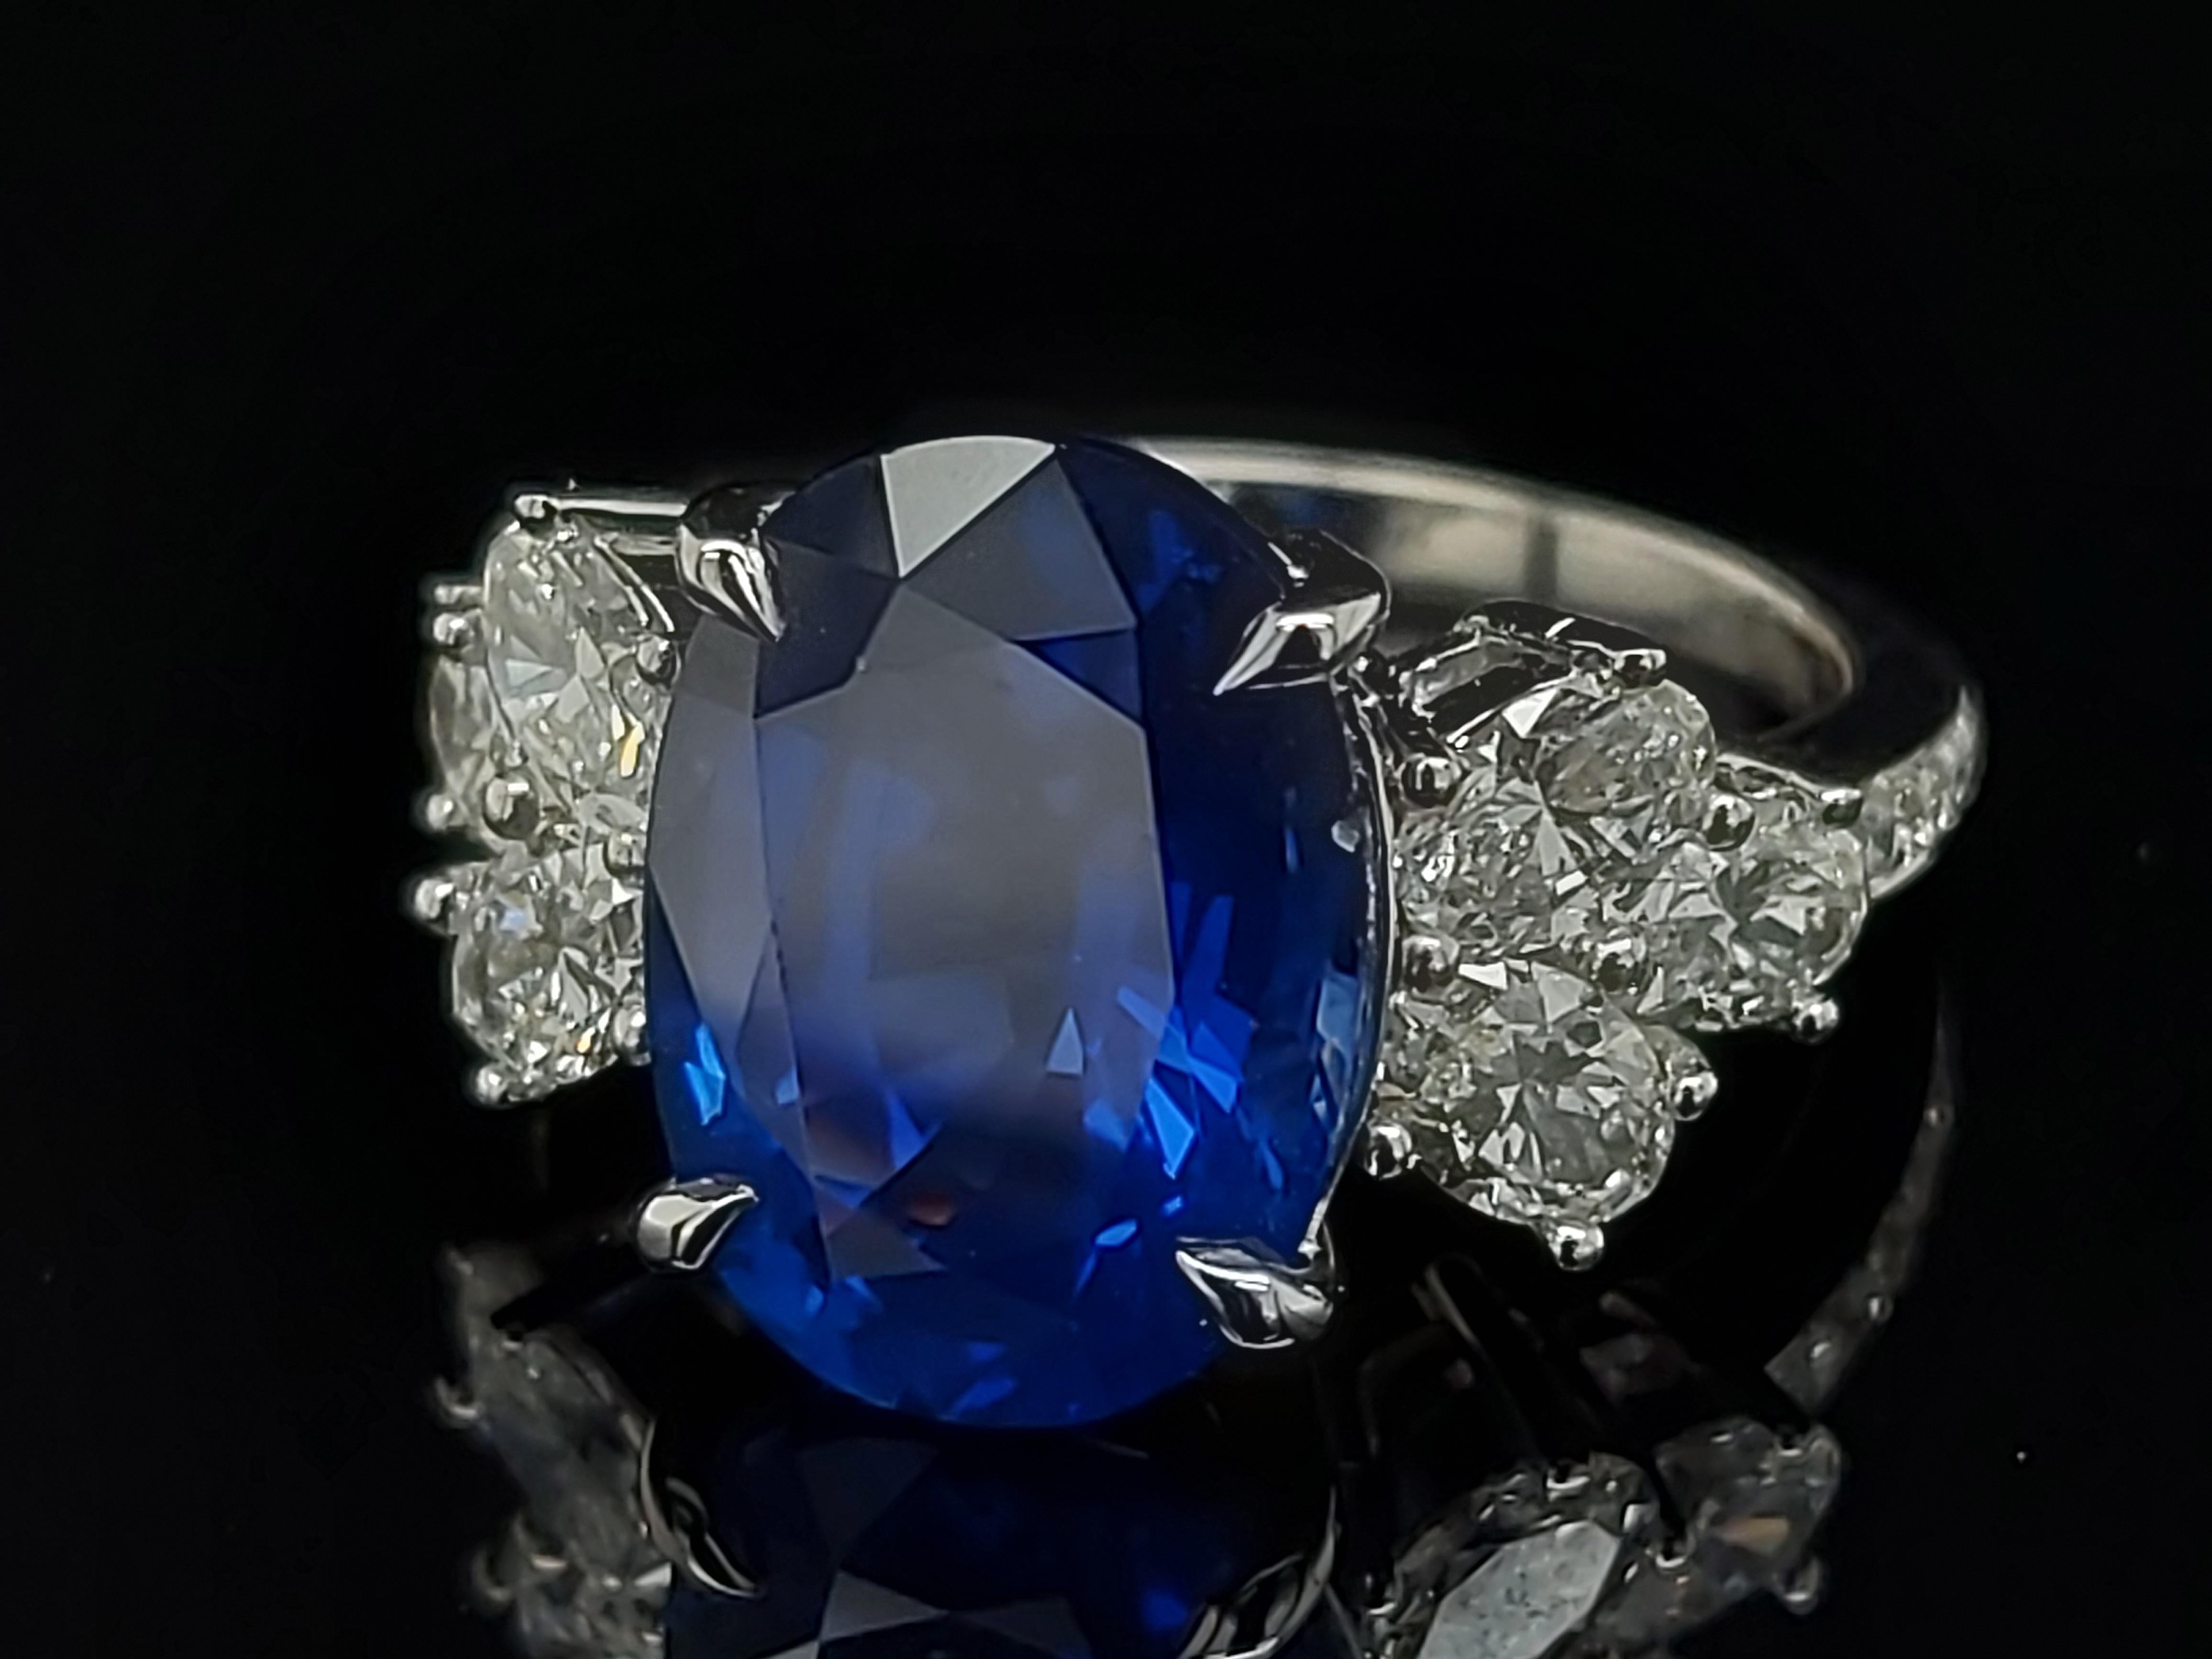 Brilliant Cut 18 Karat White Gold Ring Set with a 7 Carat Sapphire and Diamonds